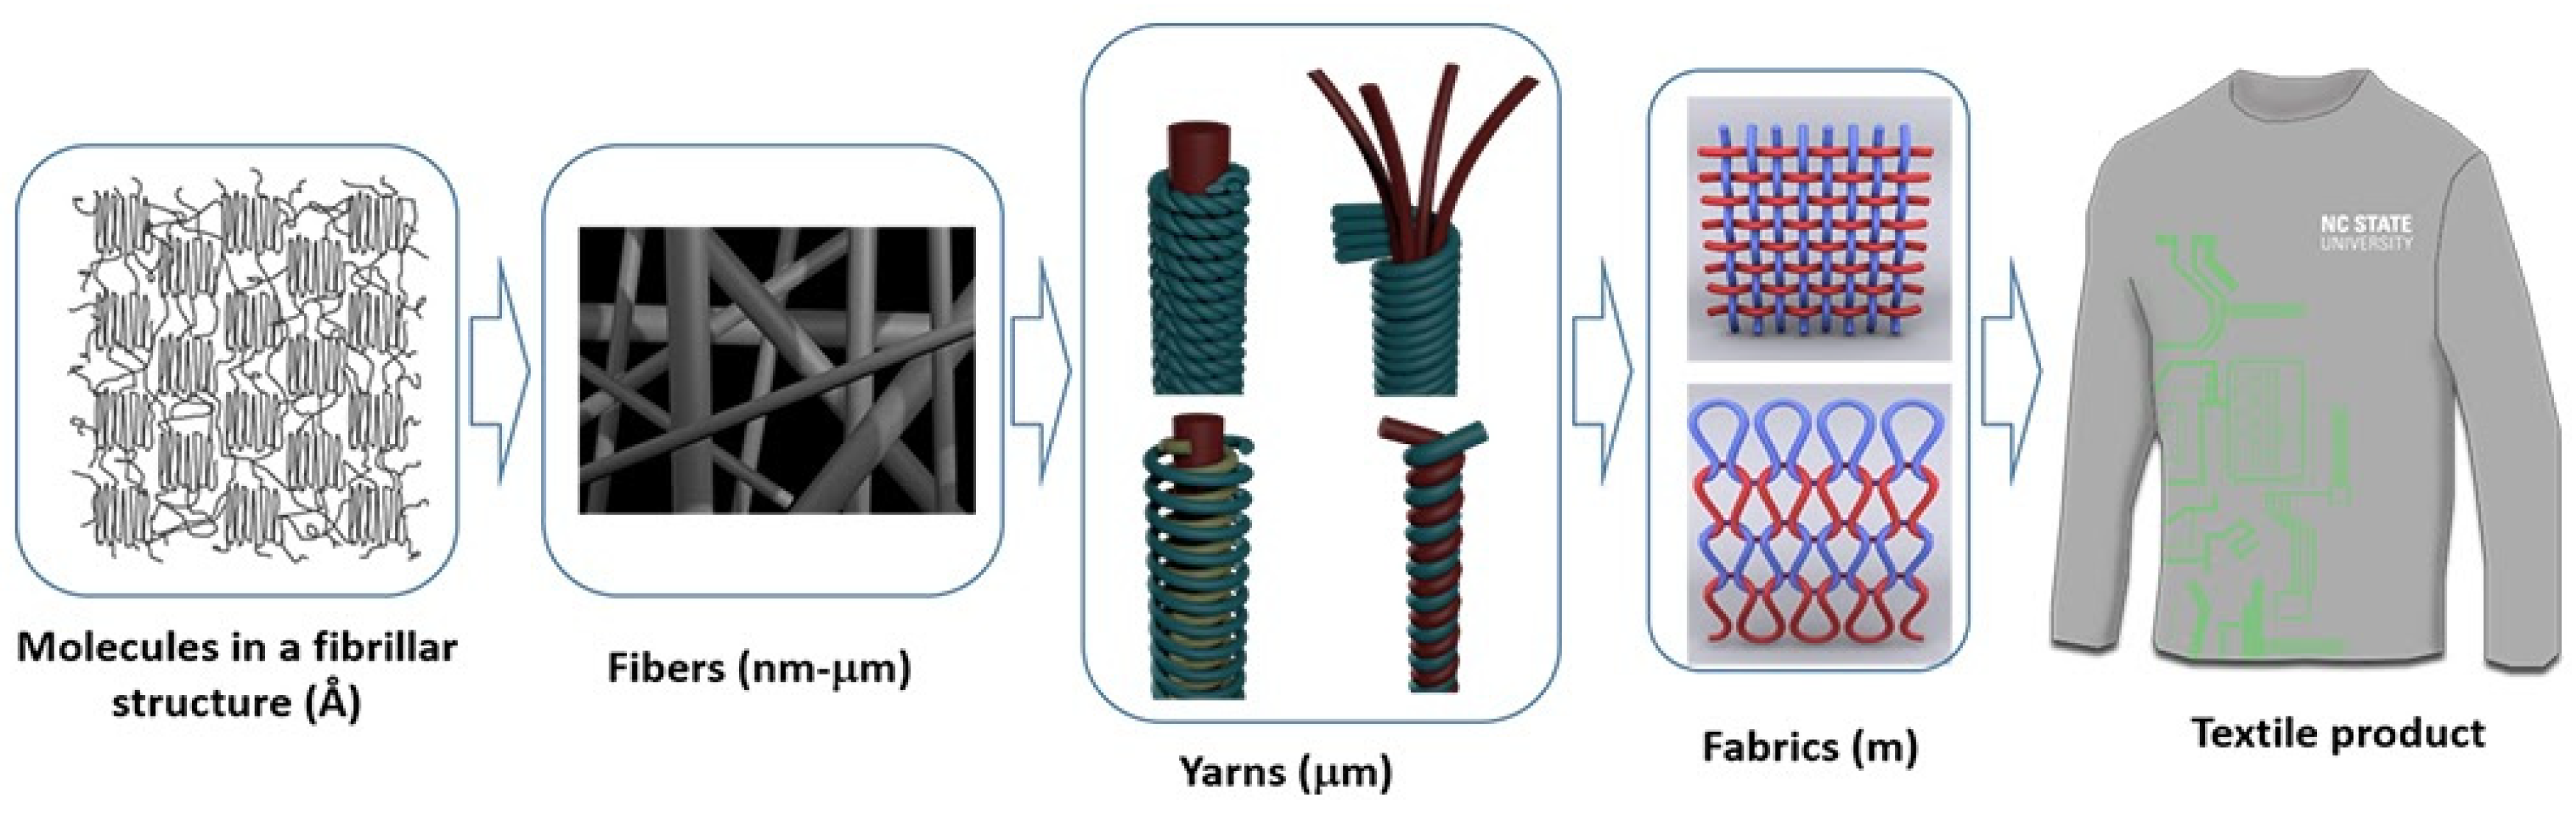 Fibers | Free Full-Text | Electrically Conductive Coatings for Fiber-Based  E-Textiles